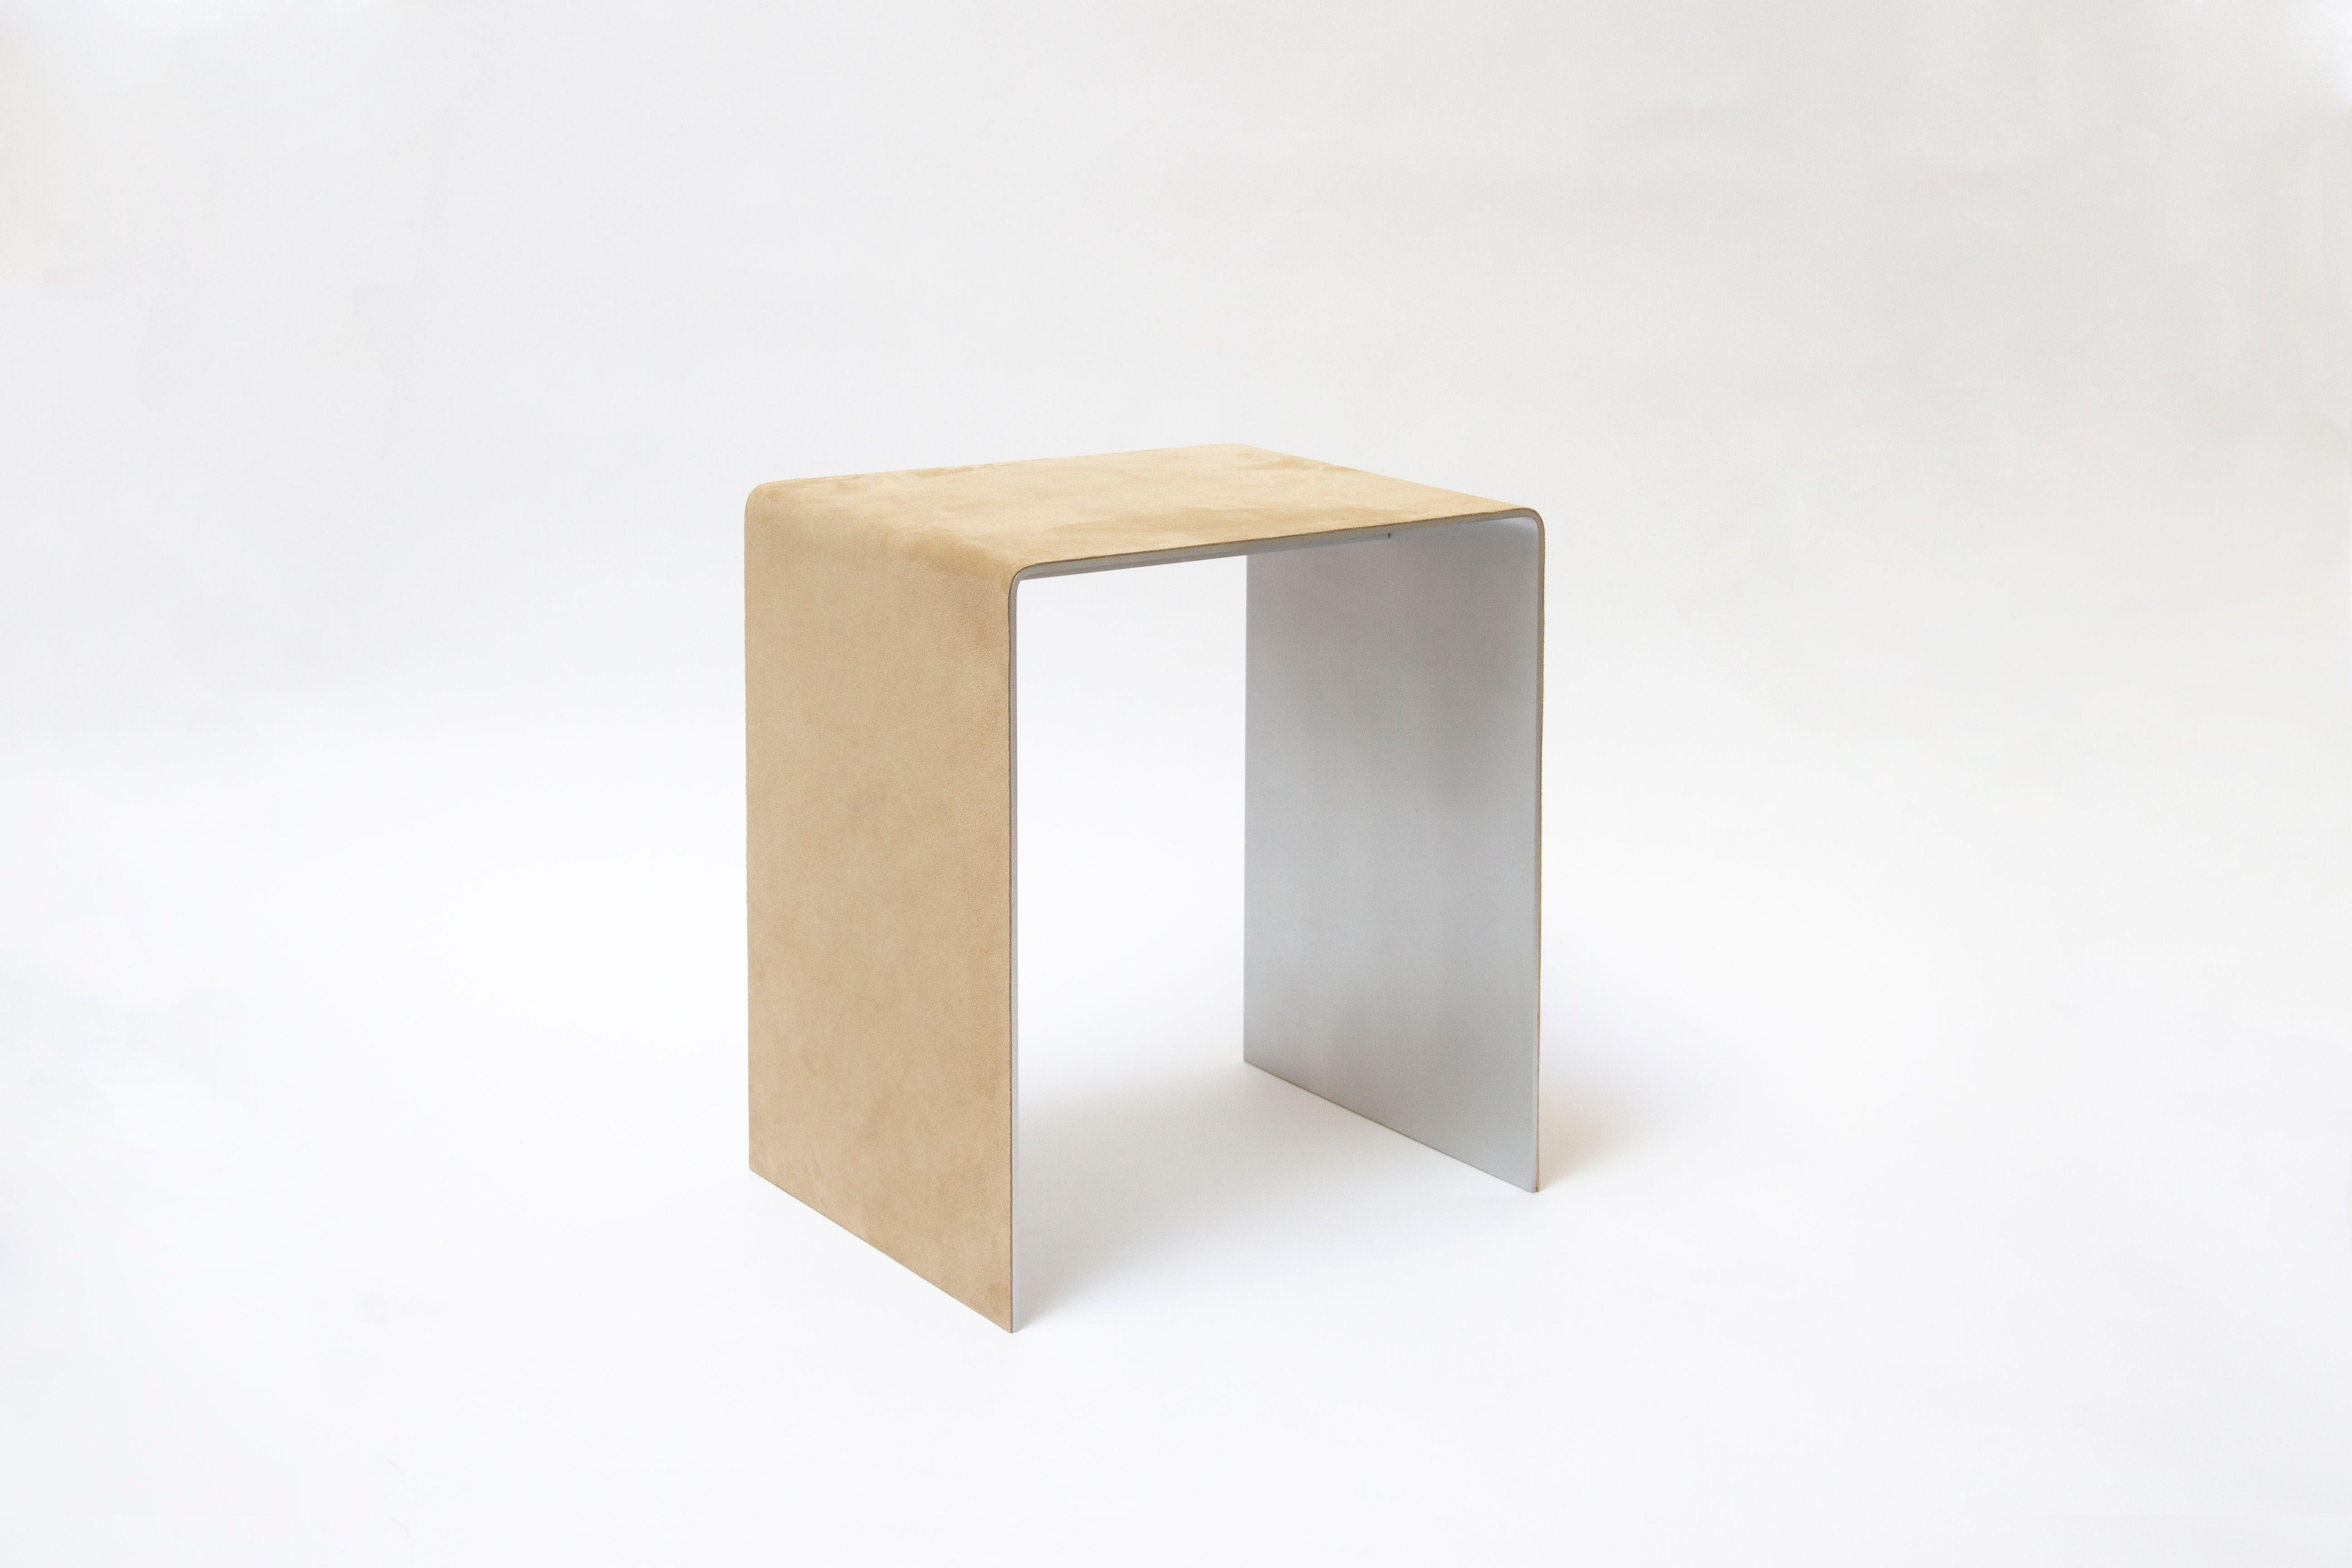 Segment stool by Estudio Persona
Dimensions: W 40.7 x D 30.5 x H 43.2 cm
Materials: Polished aluminum, suede

Leather upholstered metal stool. Pictured in aluminum and rust suede.
Also available in blackened steel, brass and